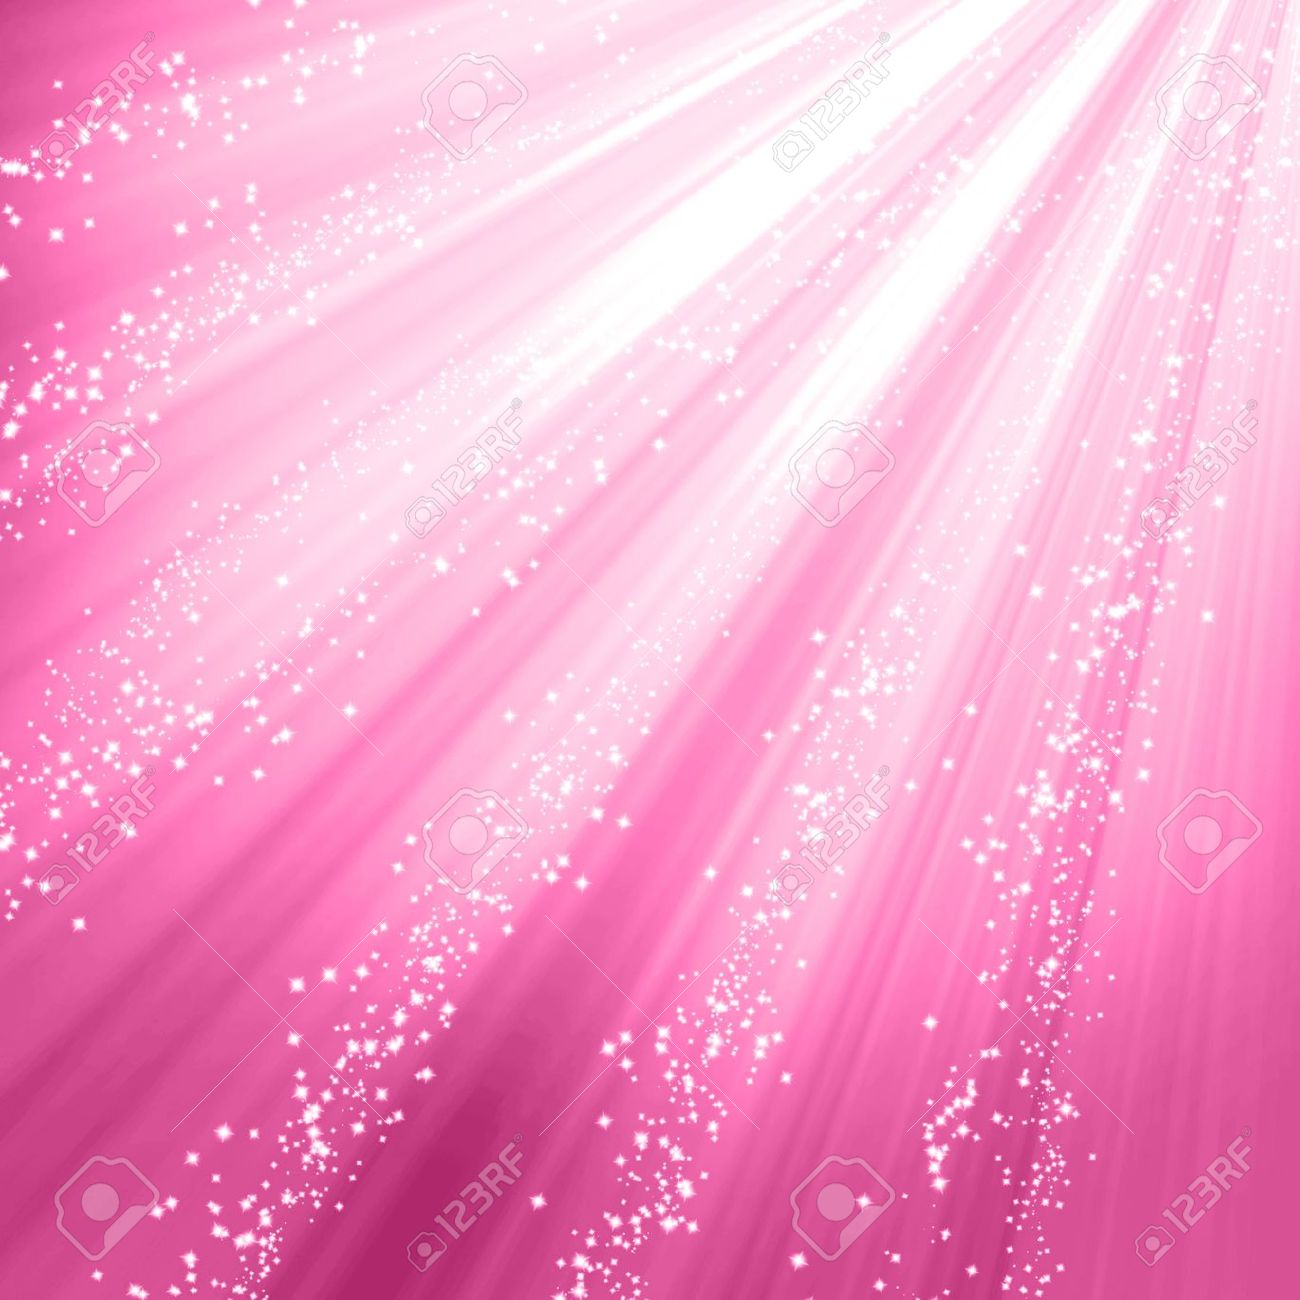 pink background pictures #15